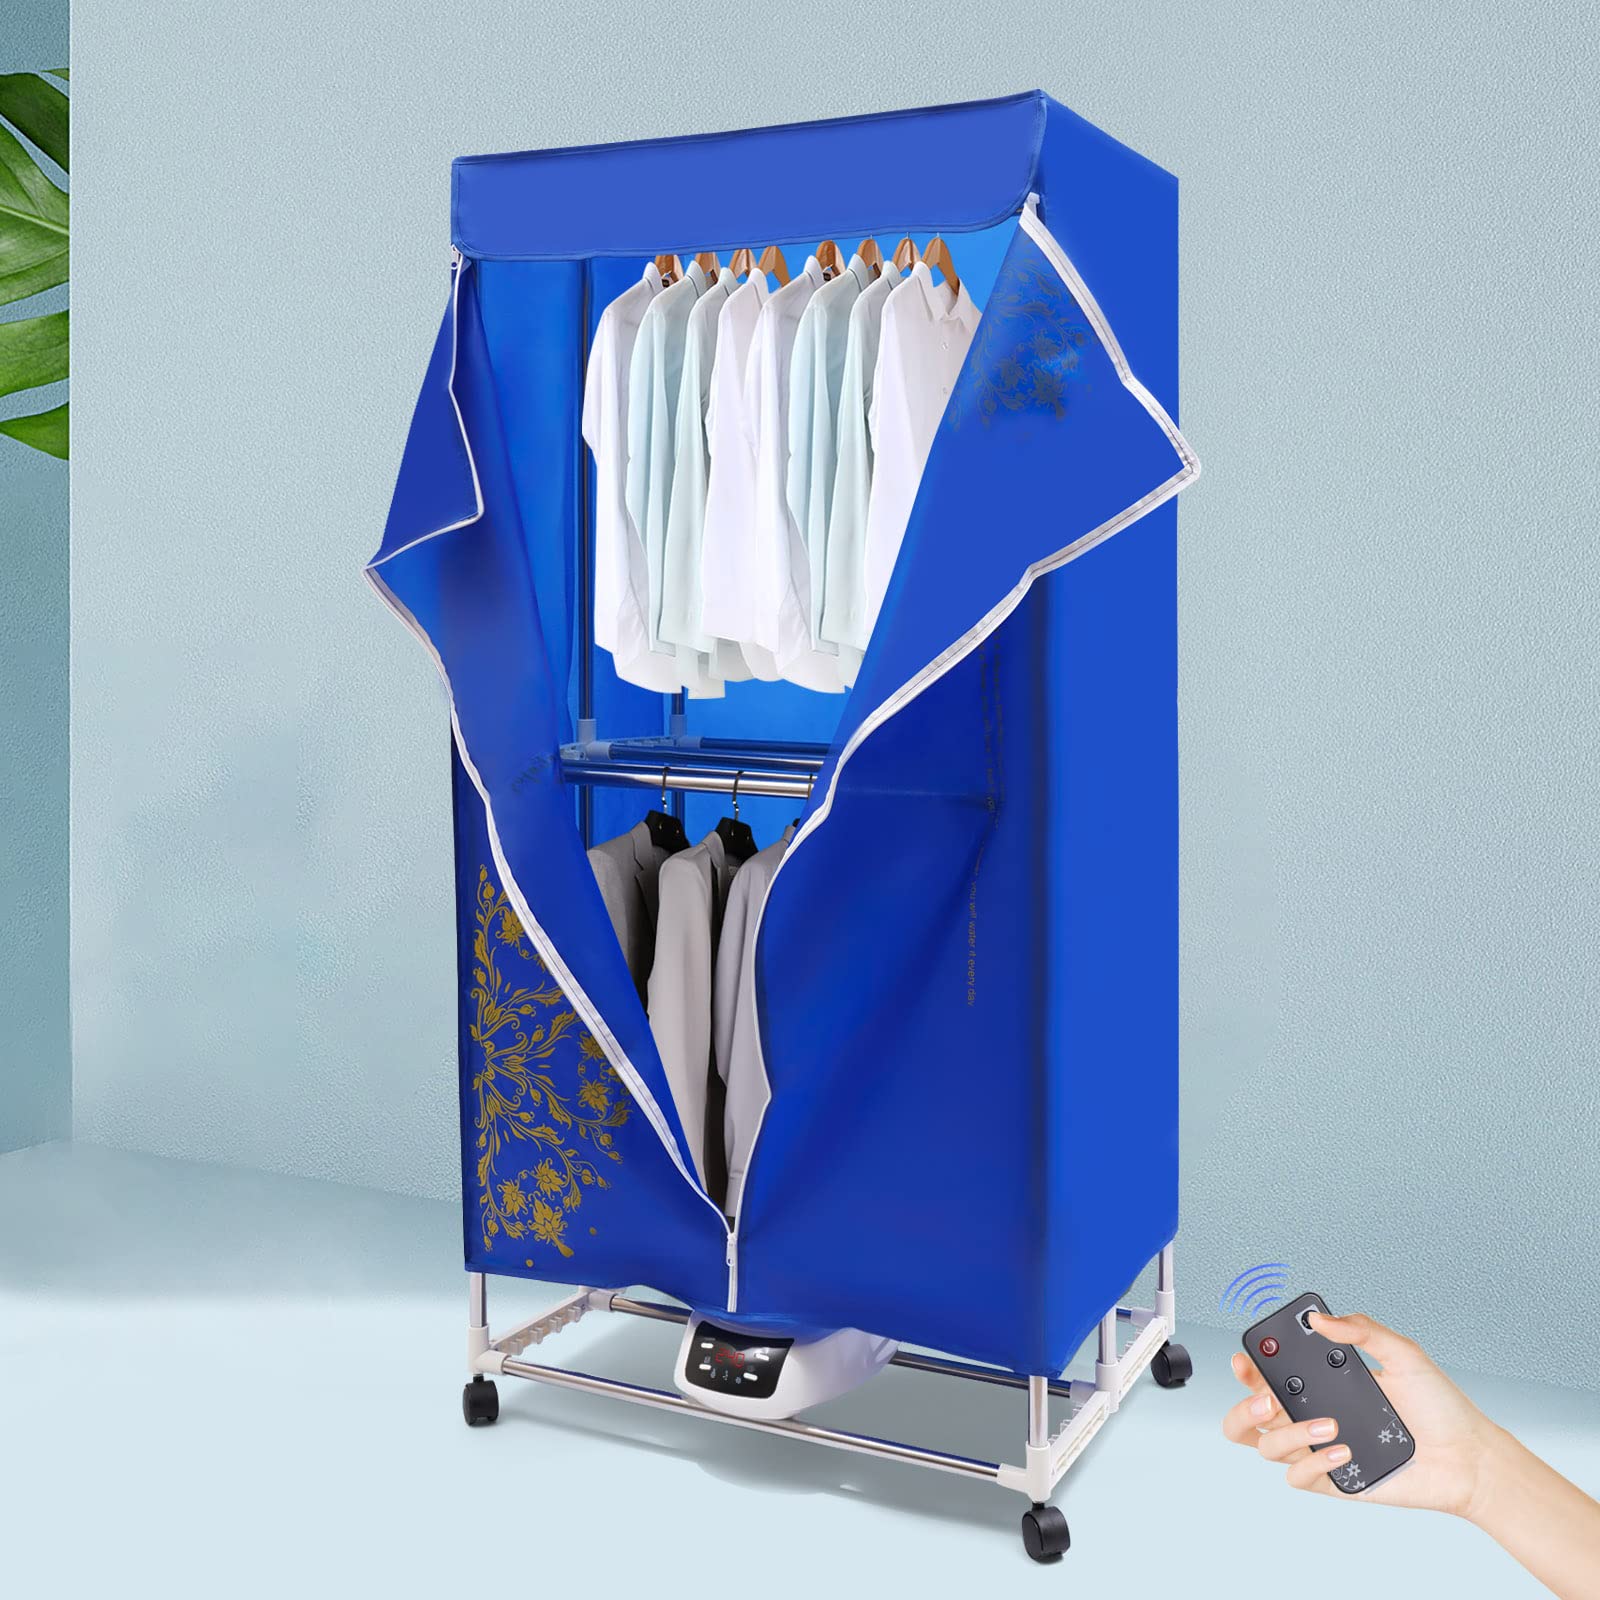 Clothes Dryer Portable Travel Dryer Machine, Portable Dryer For Apartments, New Generation Electric Clothes Drying Machine, Folding Remote Control Dryer for Home Using, 27.55in*19.68in*4.92ft